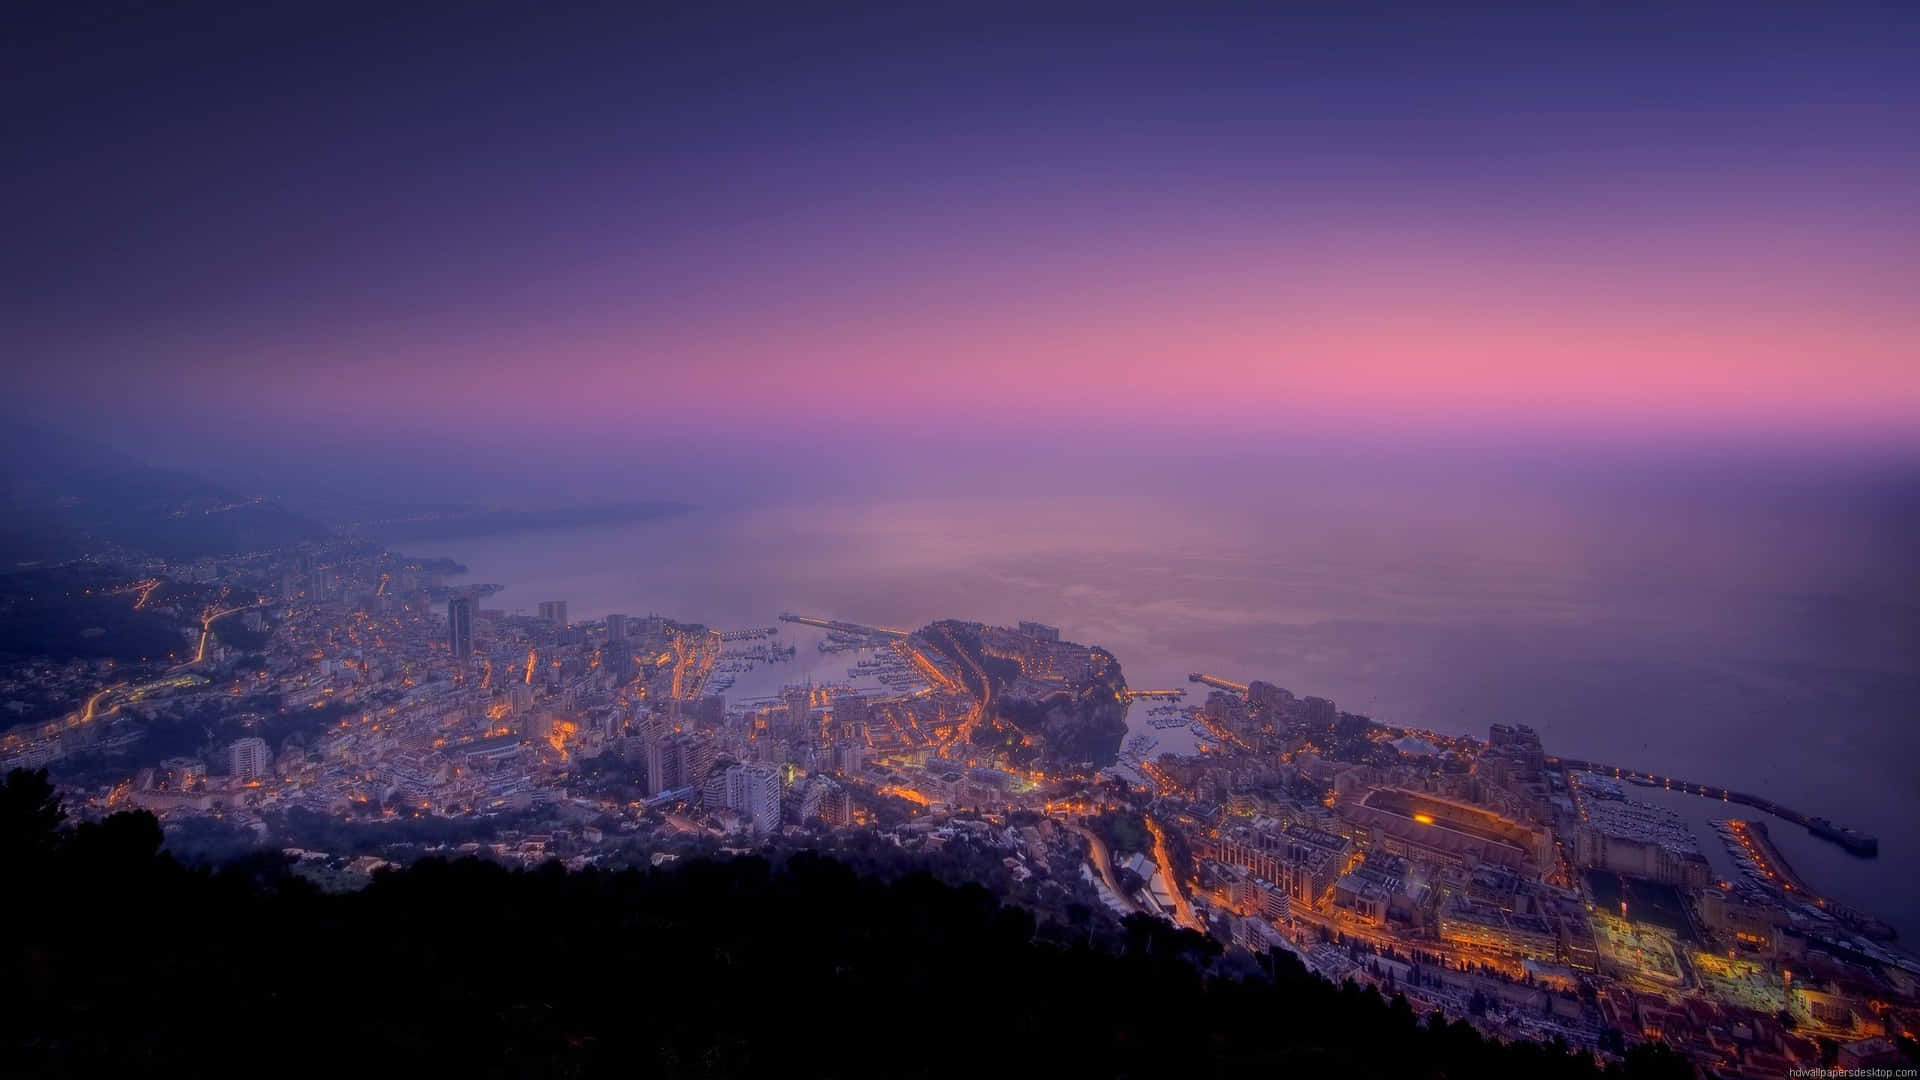 A View Of The City Of Monaco At Dusk